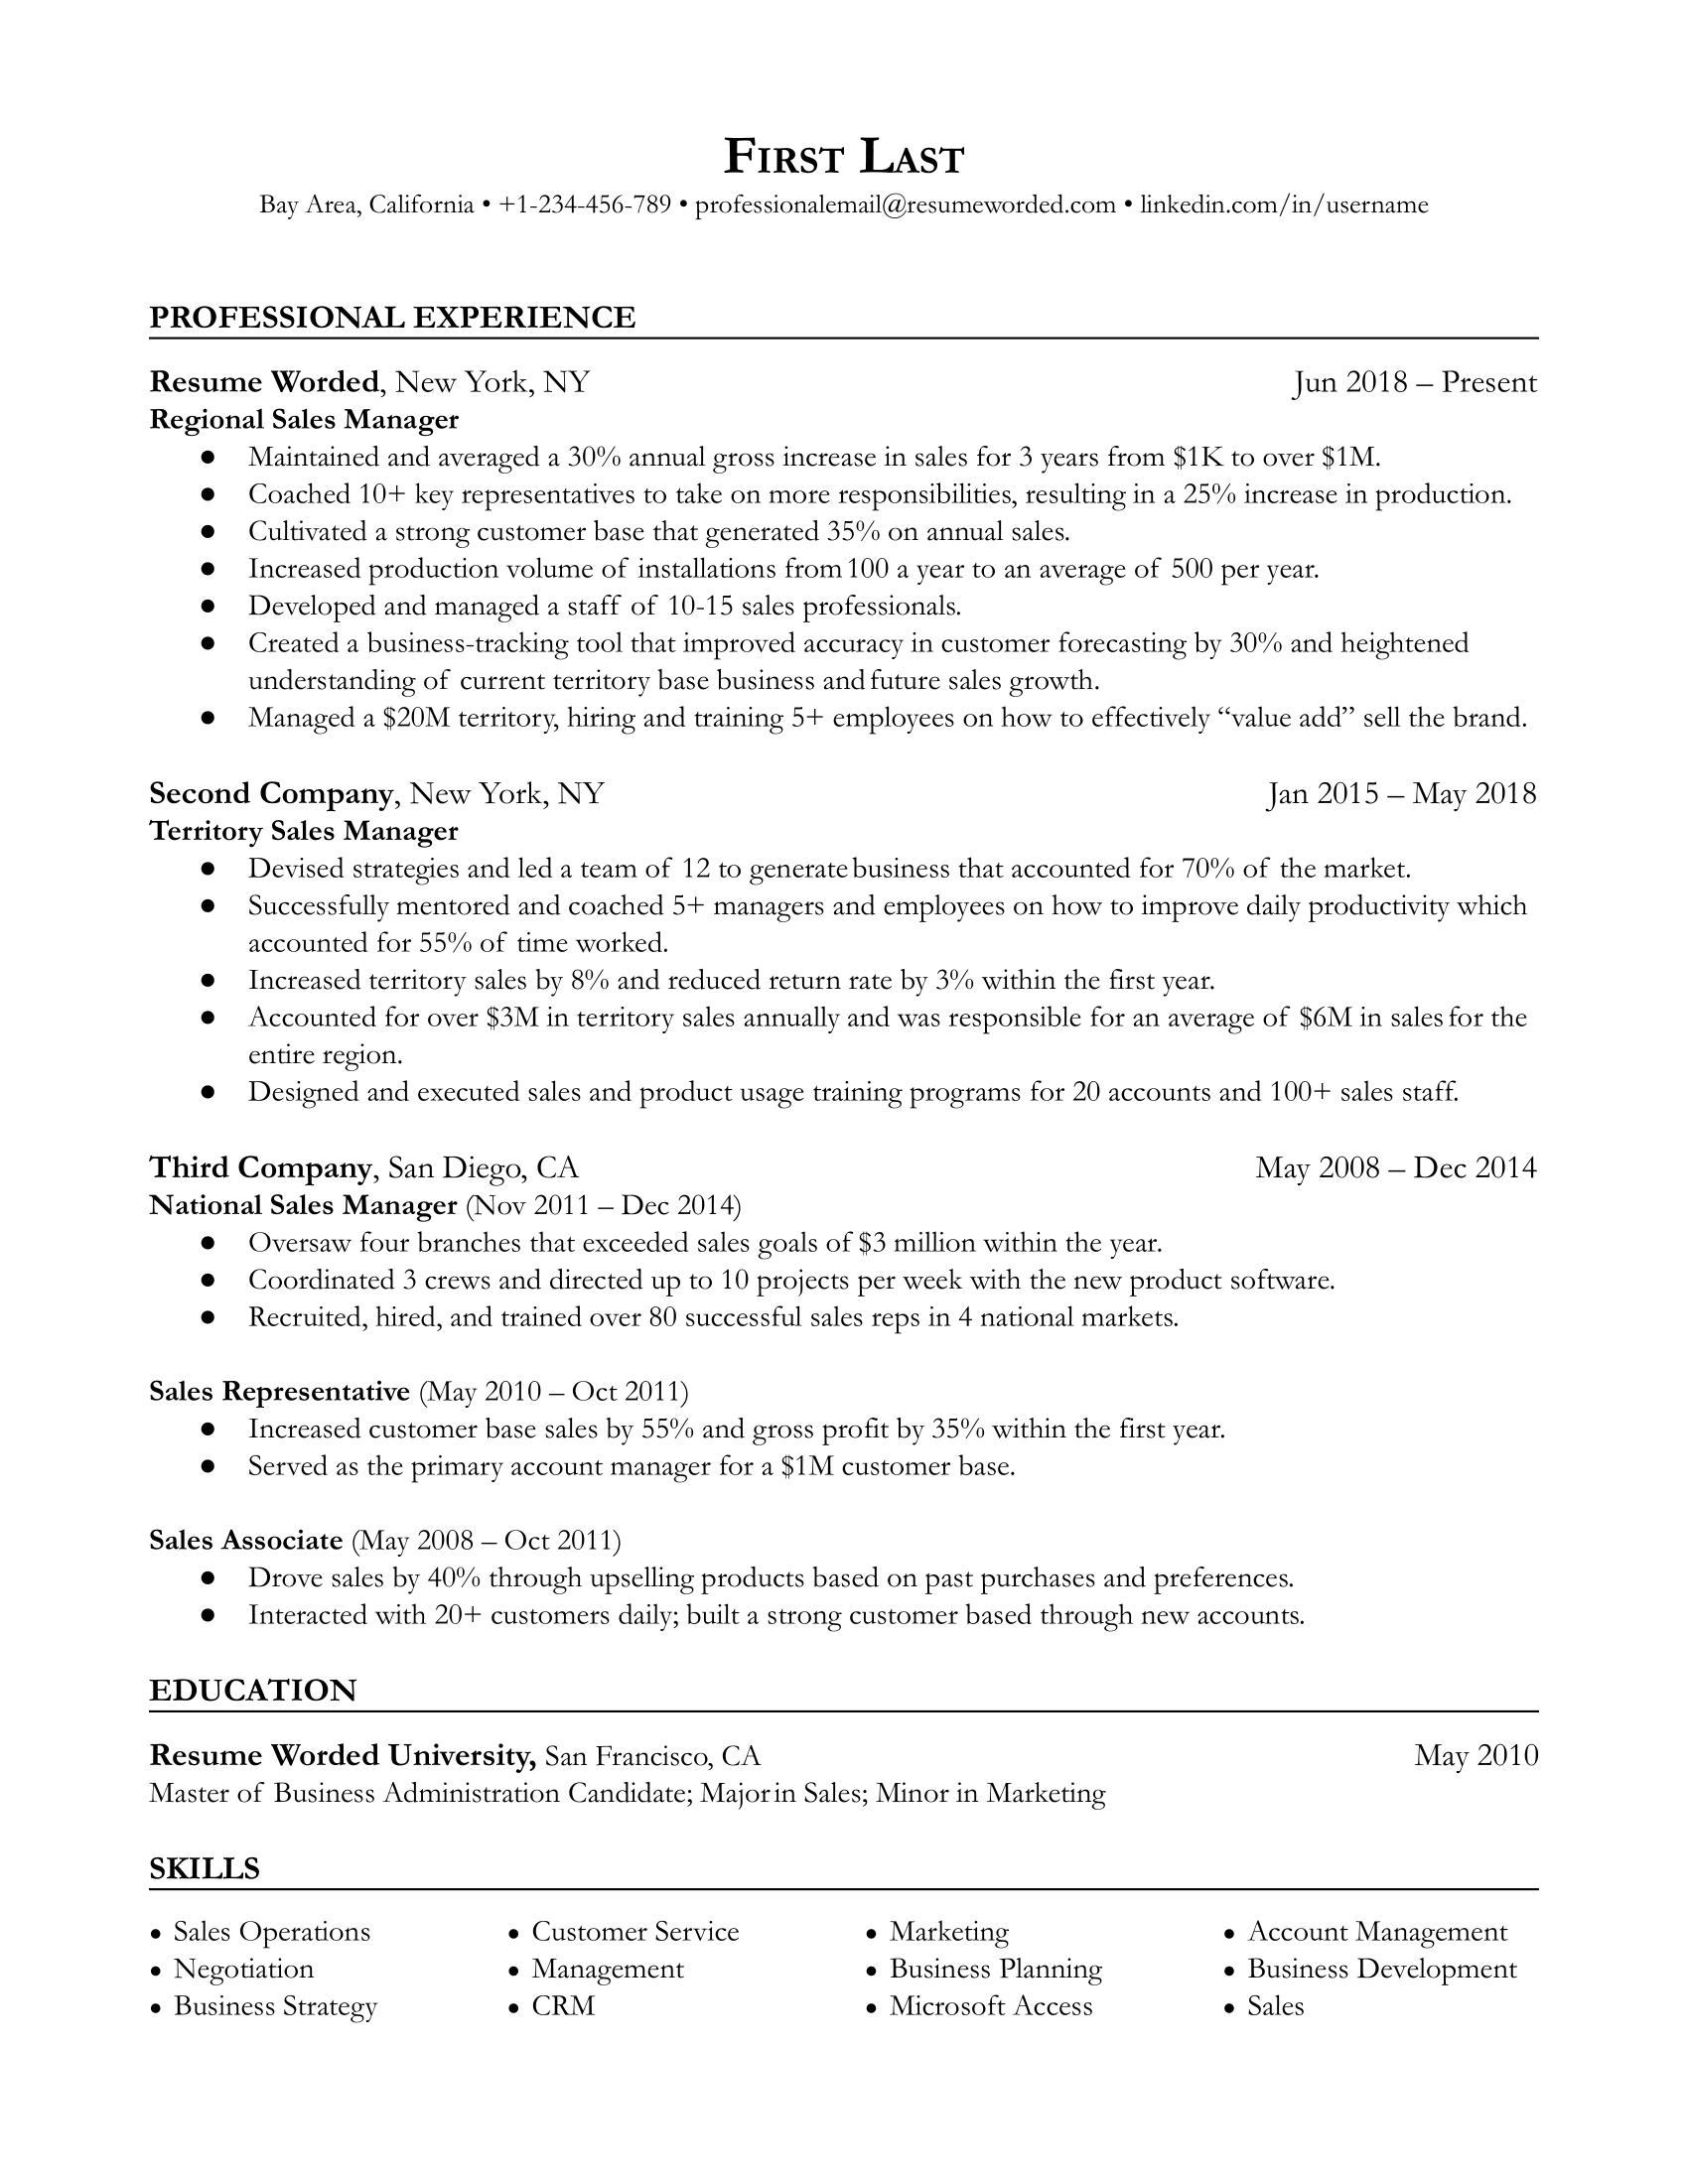 Regional Sales Manager Resume Template + Example